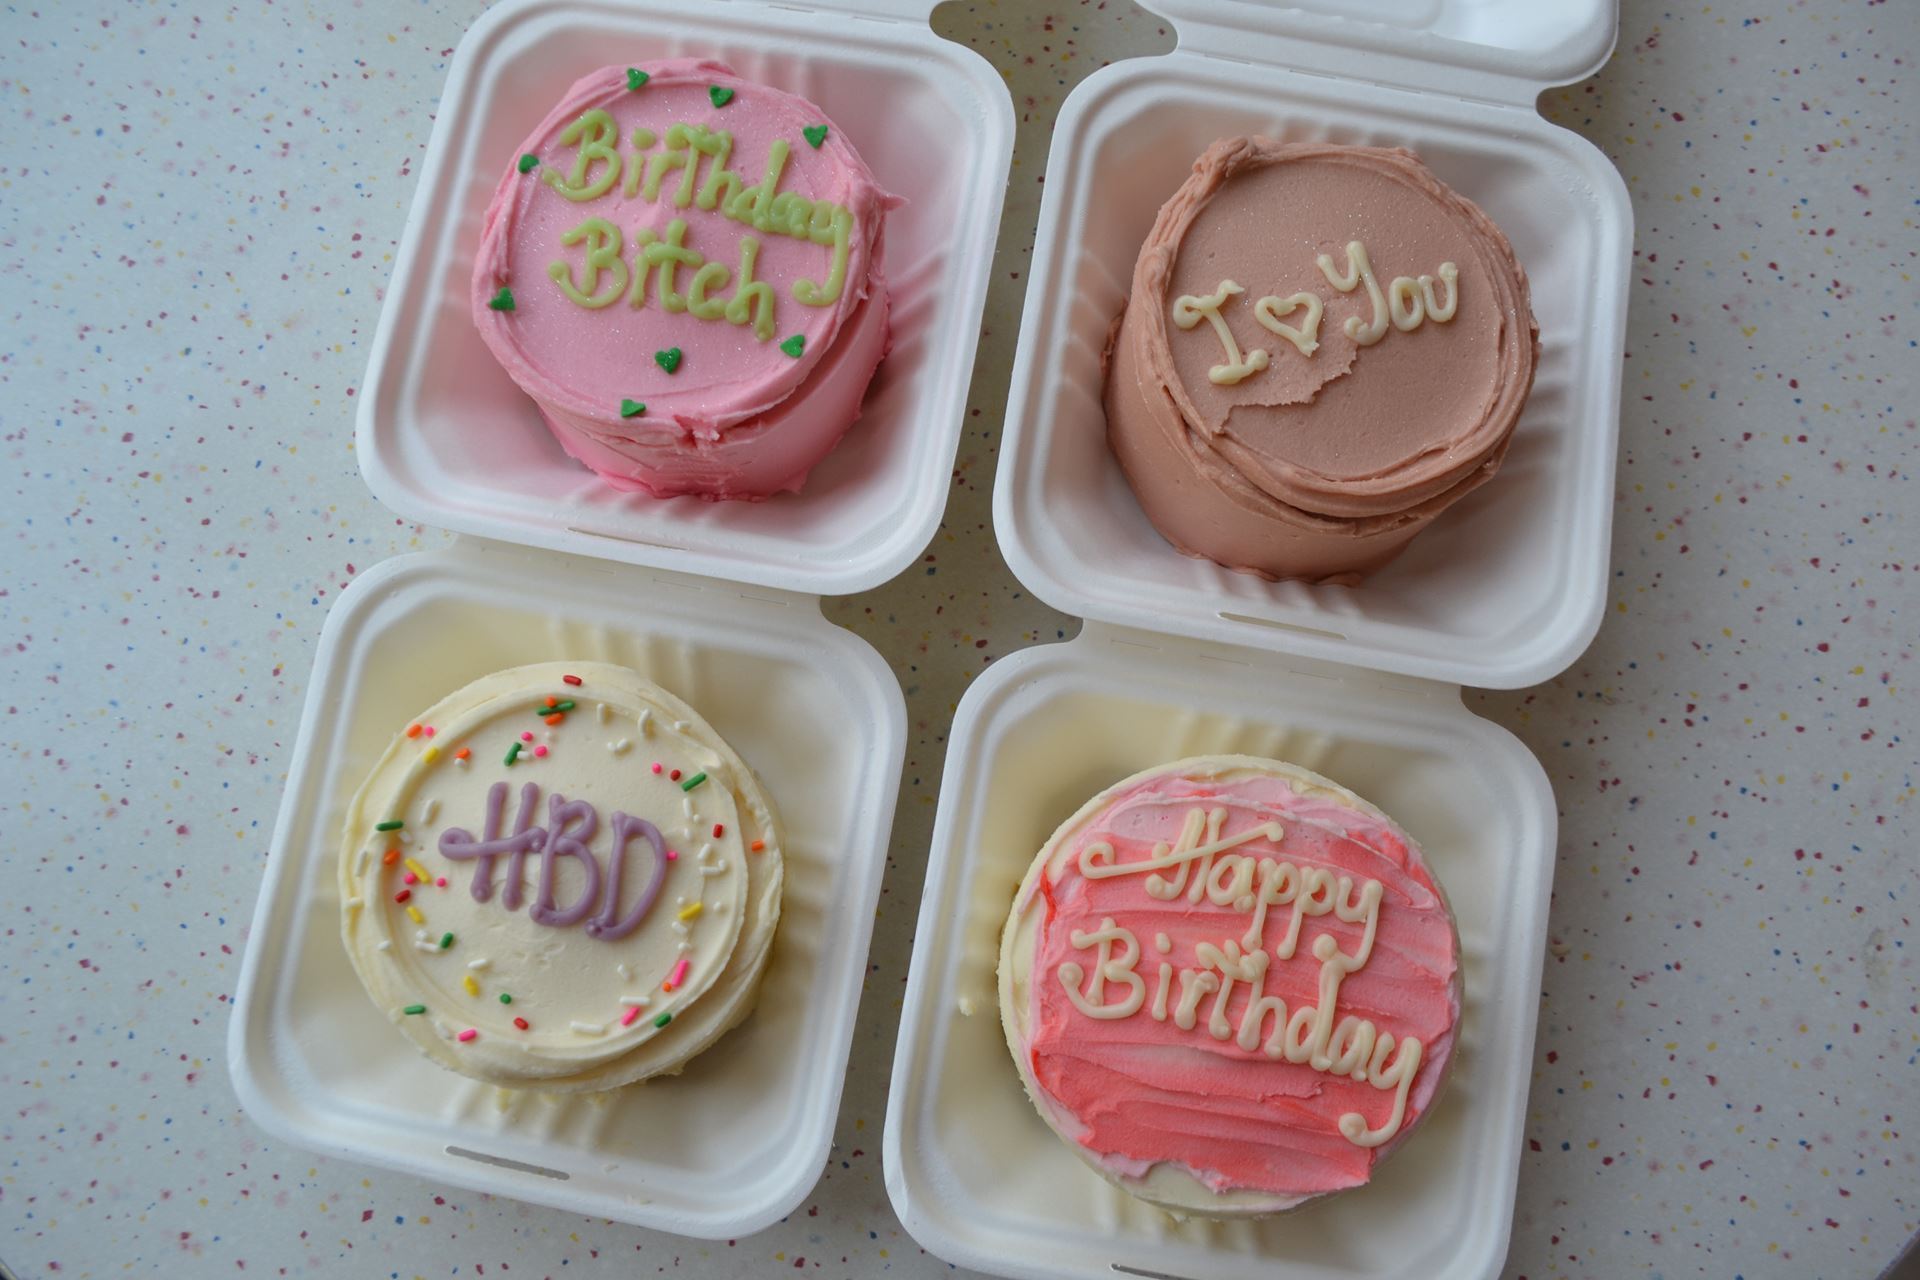 Lunch Box Cake Decorating Class - Sunday 17th March 11 - 12.30pm